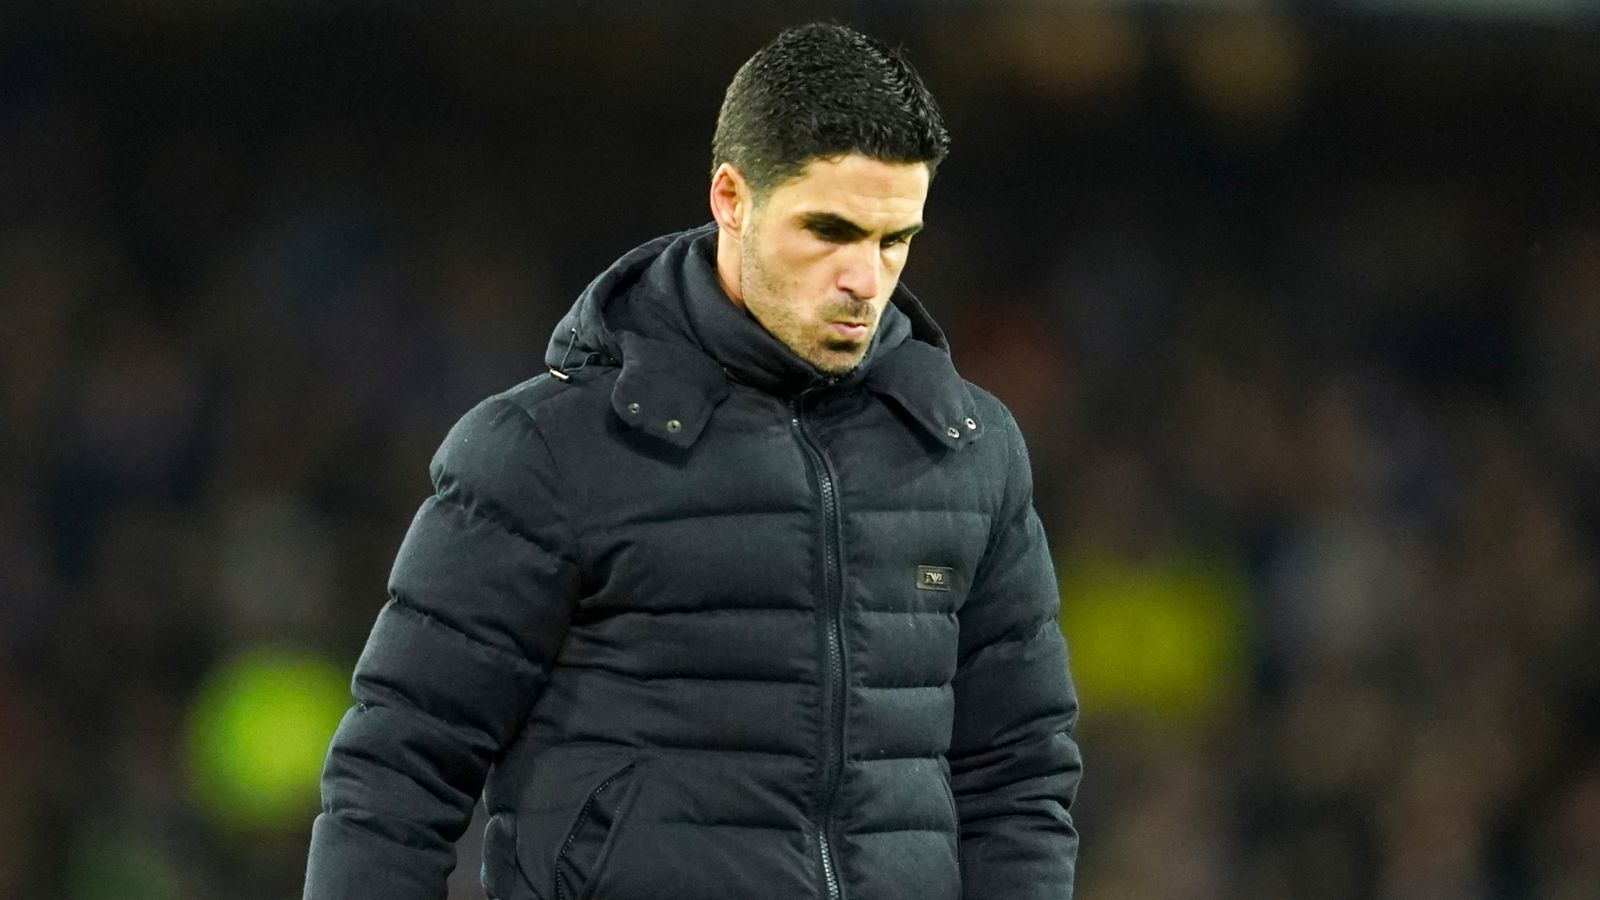 Mikel Arteta: Arsenal manager tests positive for Covid-19 and will miss Man City match